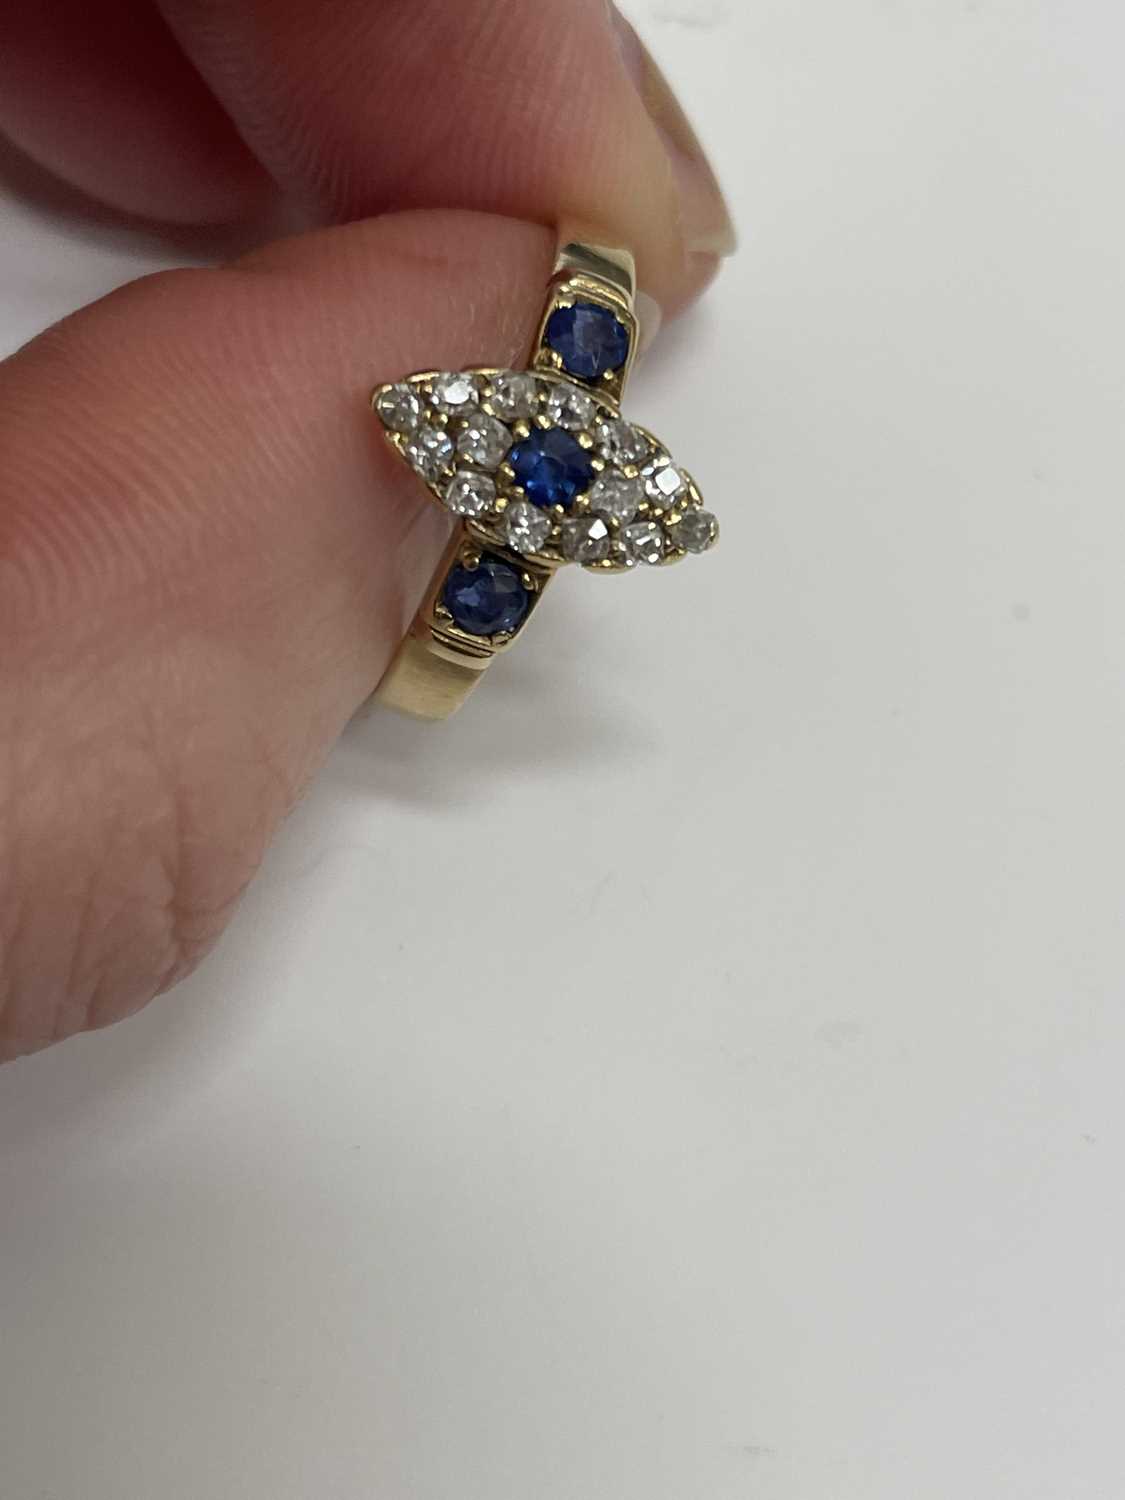 An 18ct gold Edwardian sapphire and diamond ring - Image 3 of 8